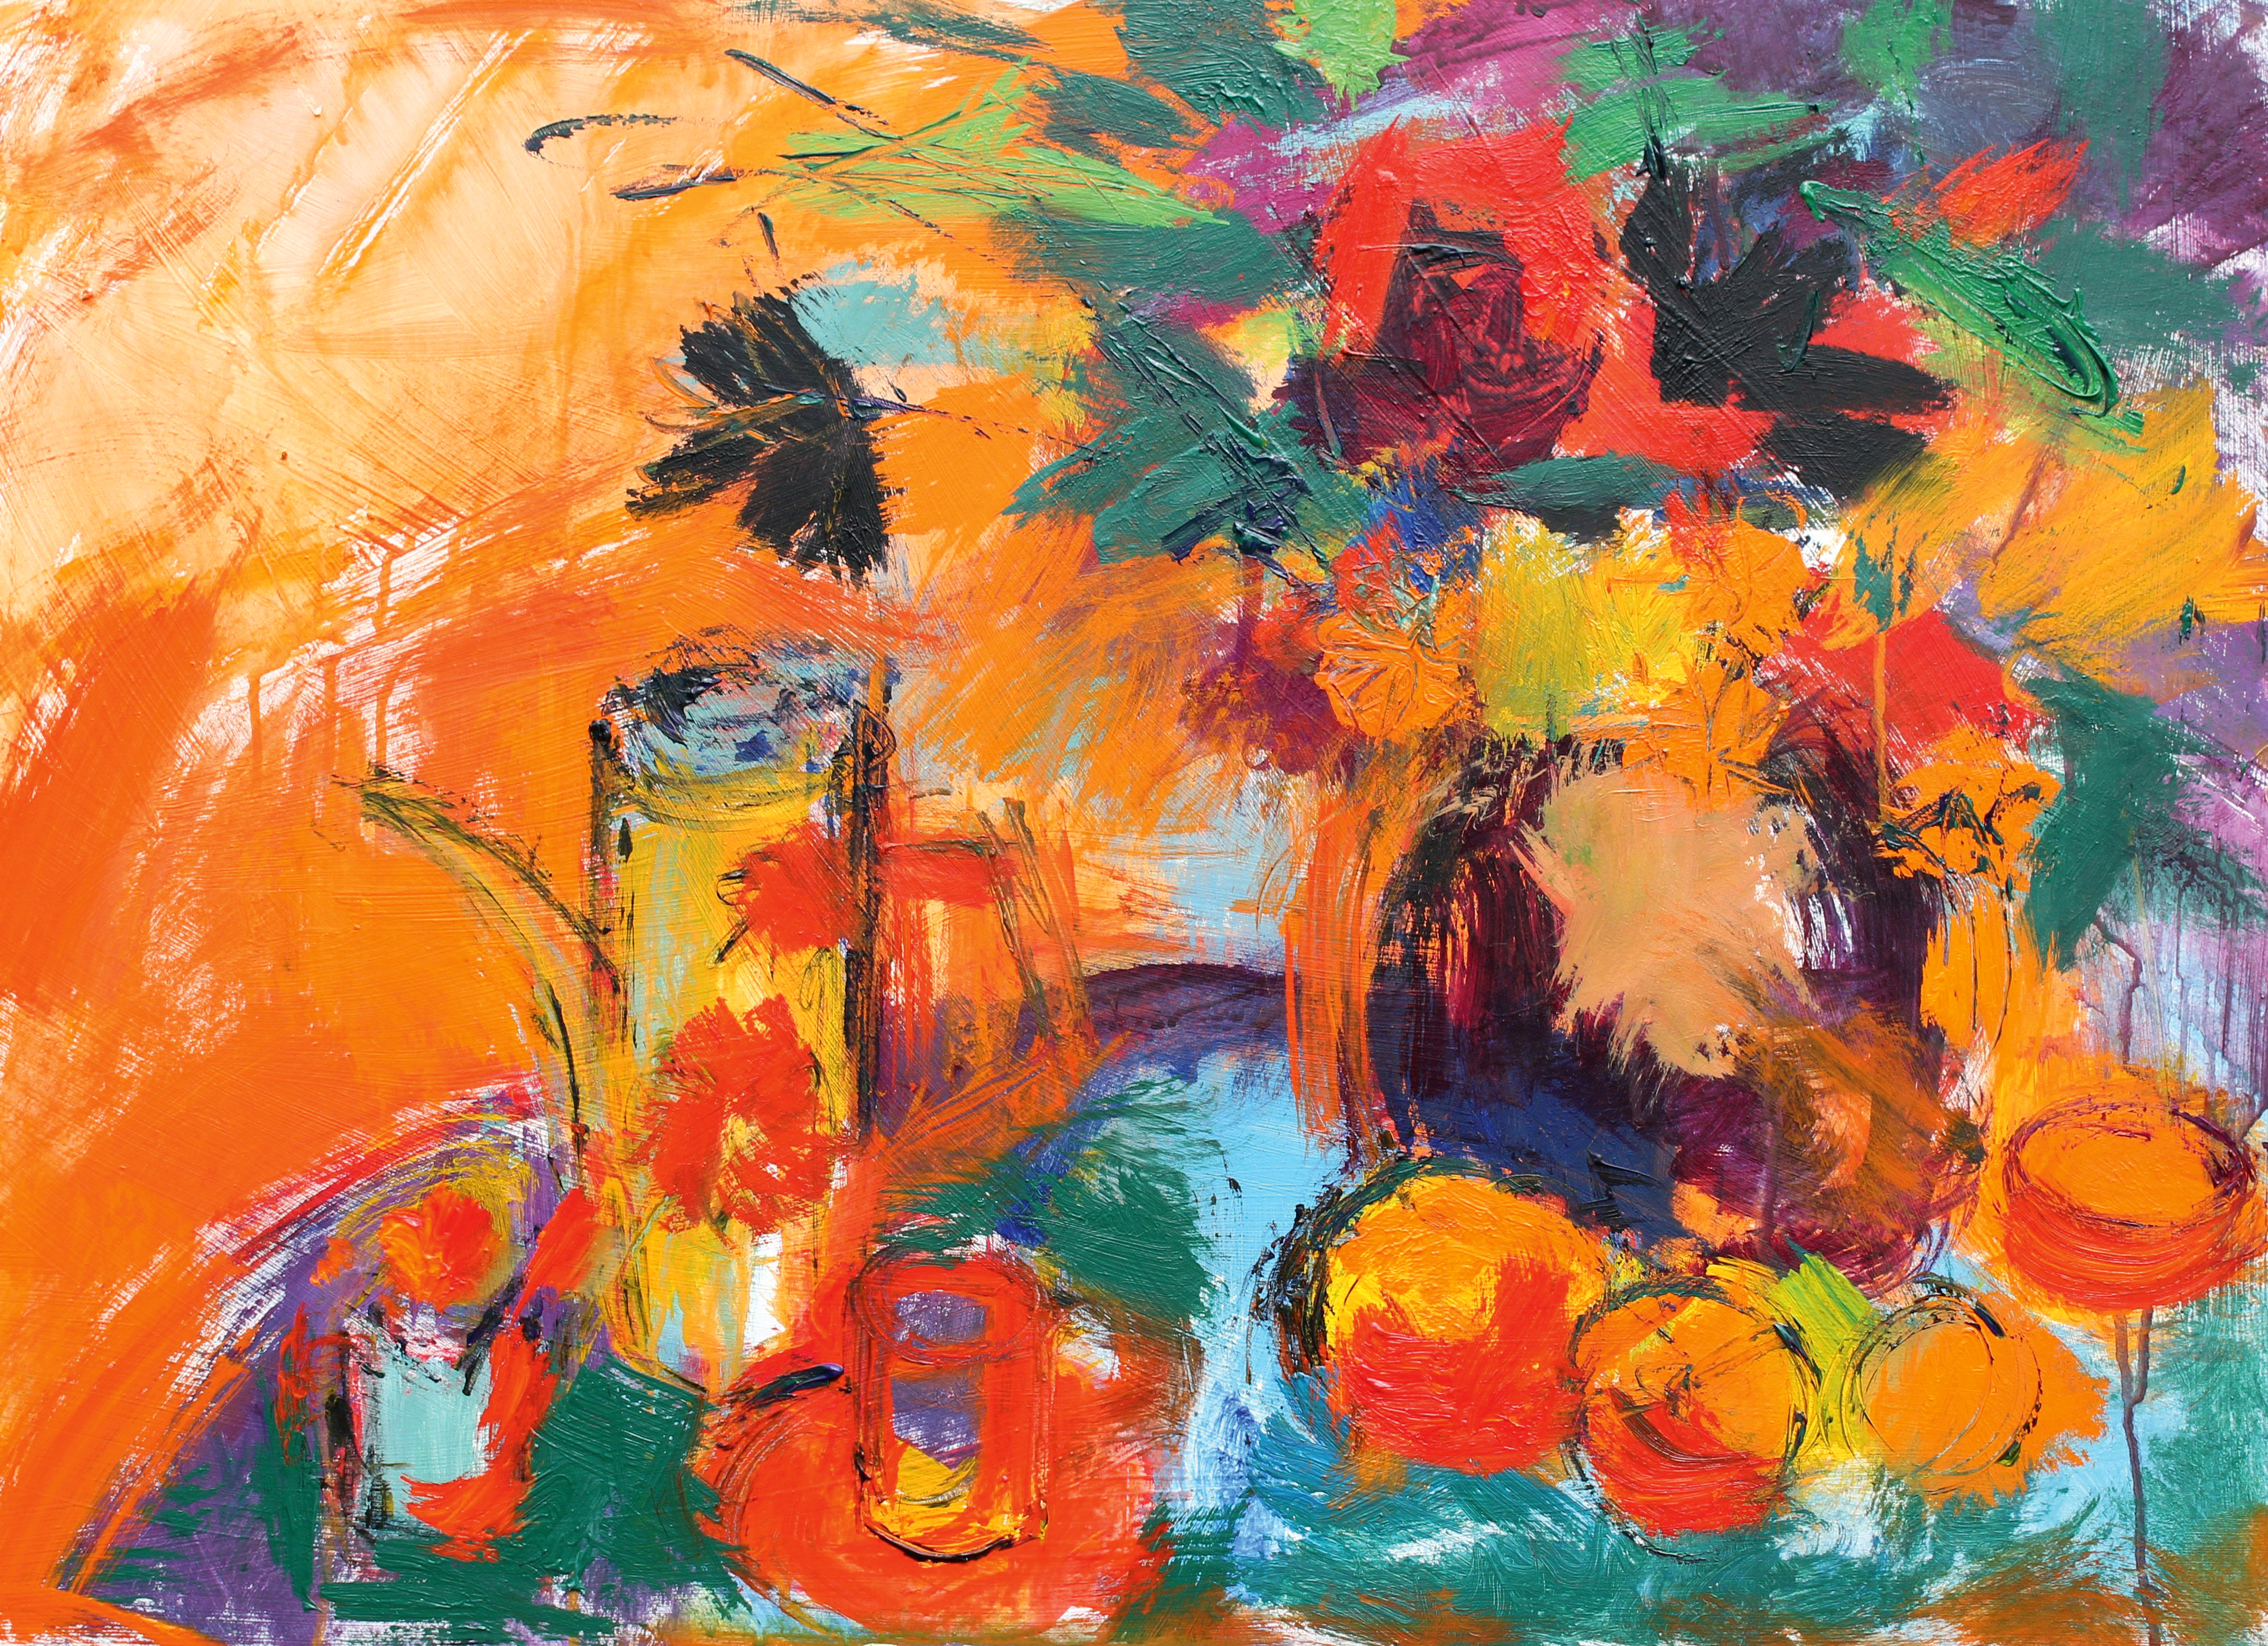 Rough underpainting of a vibrant still life